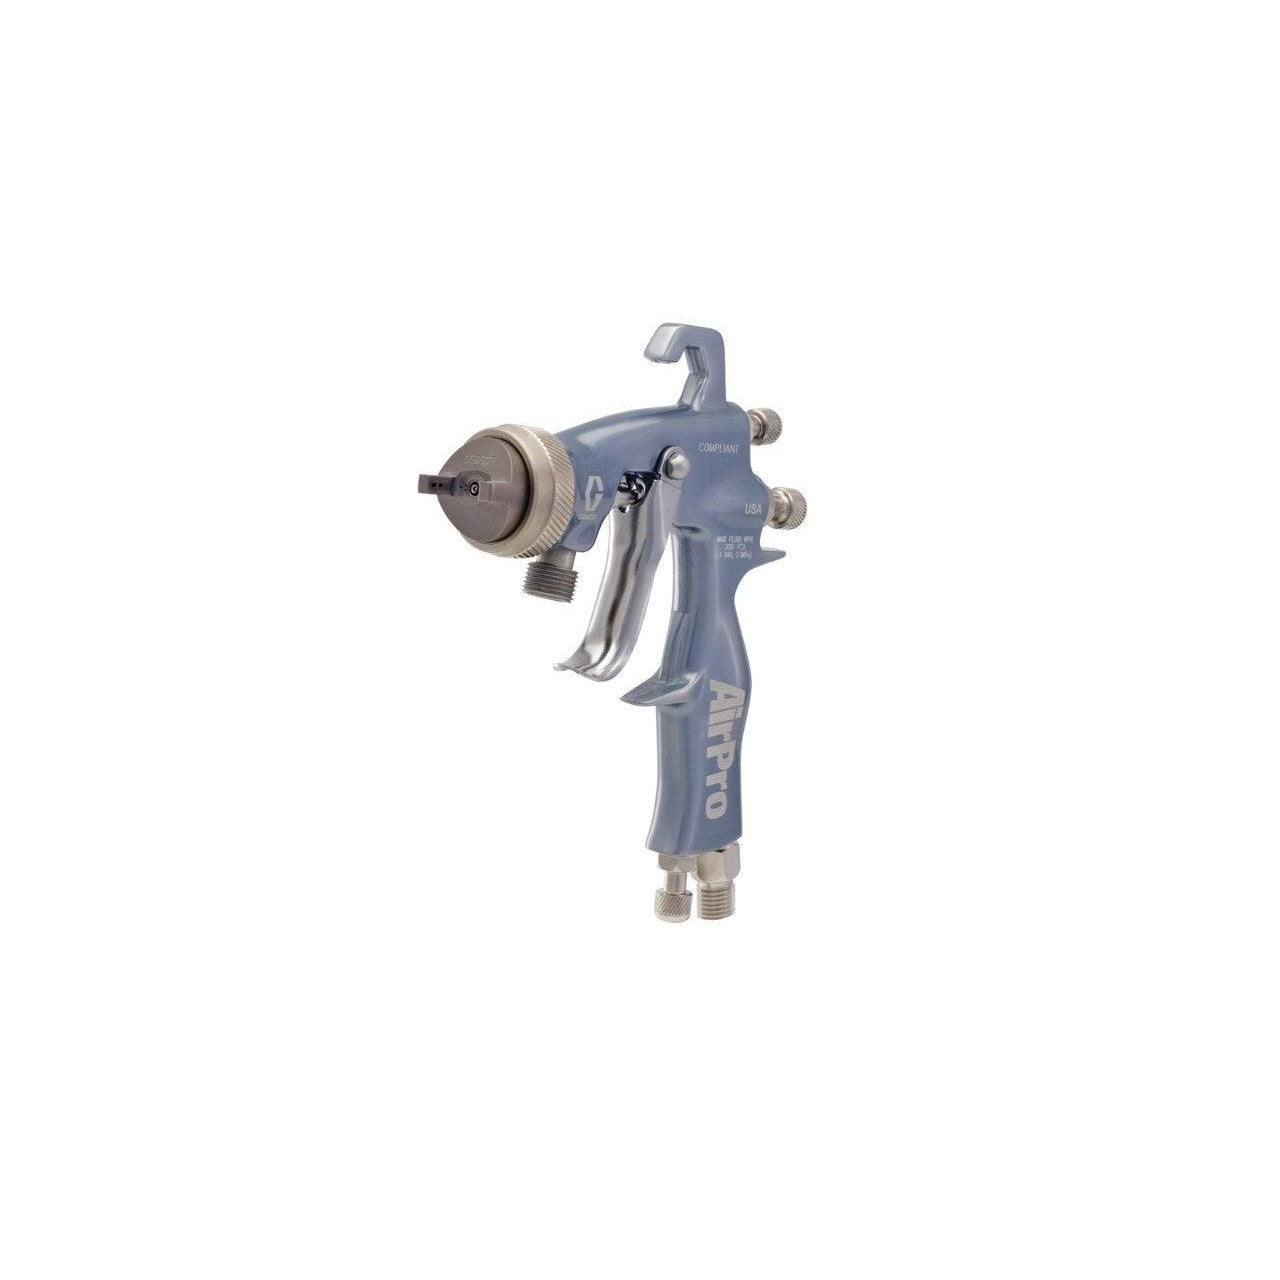 AirPro Air Spray Pressure Feed Gun, Compliant, 0.086 inch (2.2 mm) Nozzle, for High Wear Applications